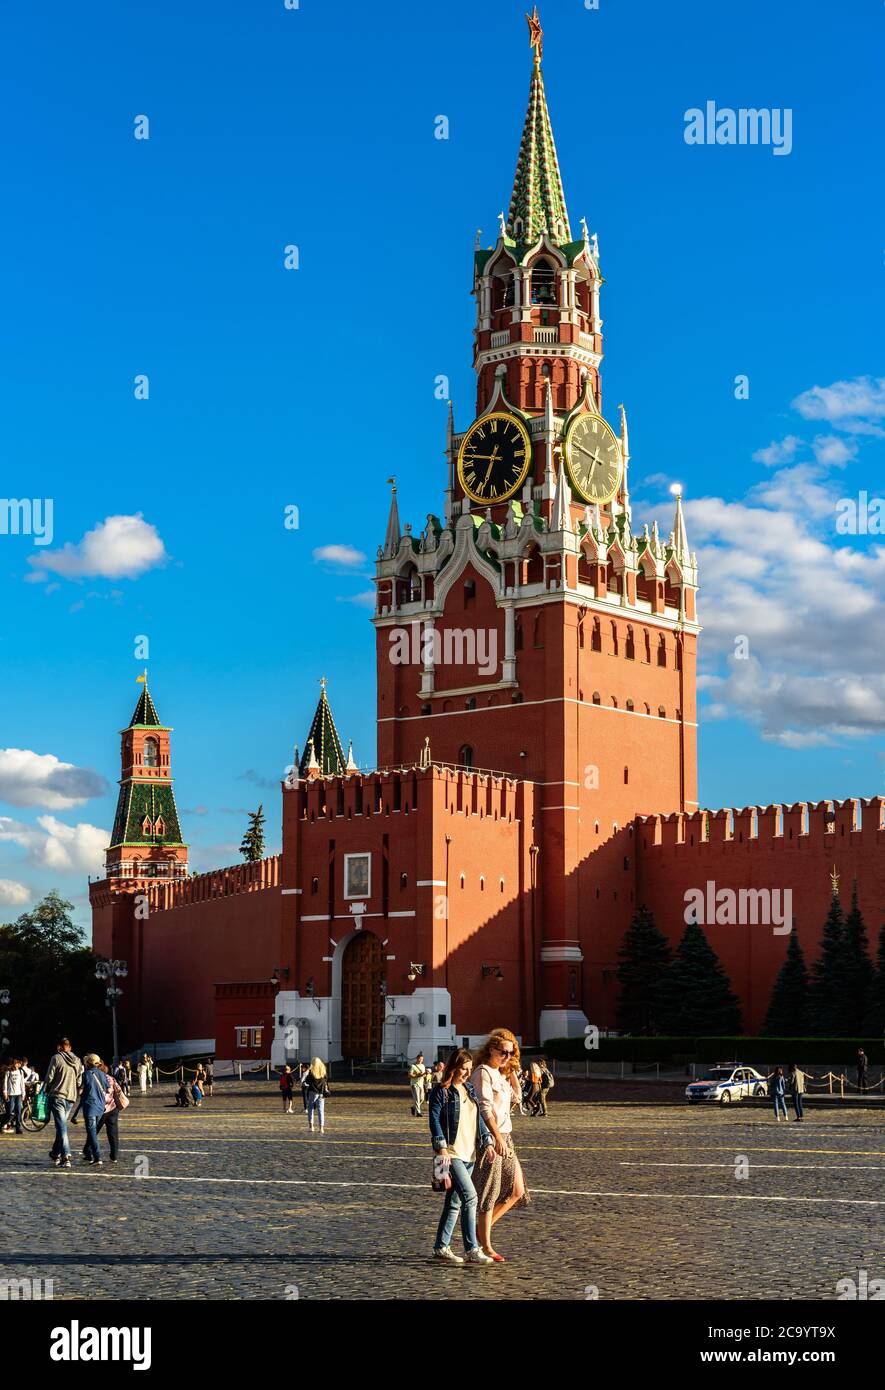 Moscow - July 23, 2020: Kremlin on Red Square in Moscow, Russia. Is is famous tourist attraction of Moscow, top Russian landmark. People walk next to Stock Photo